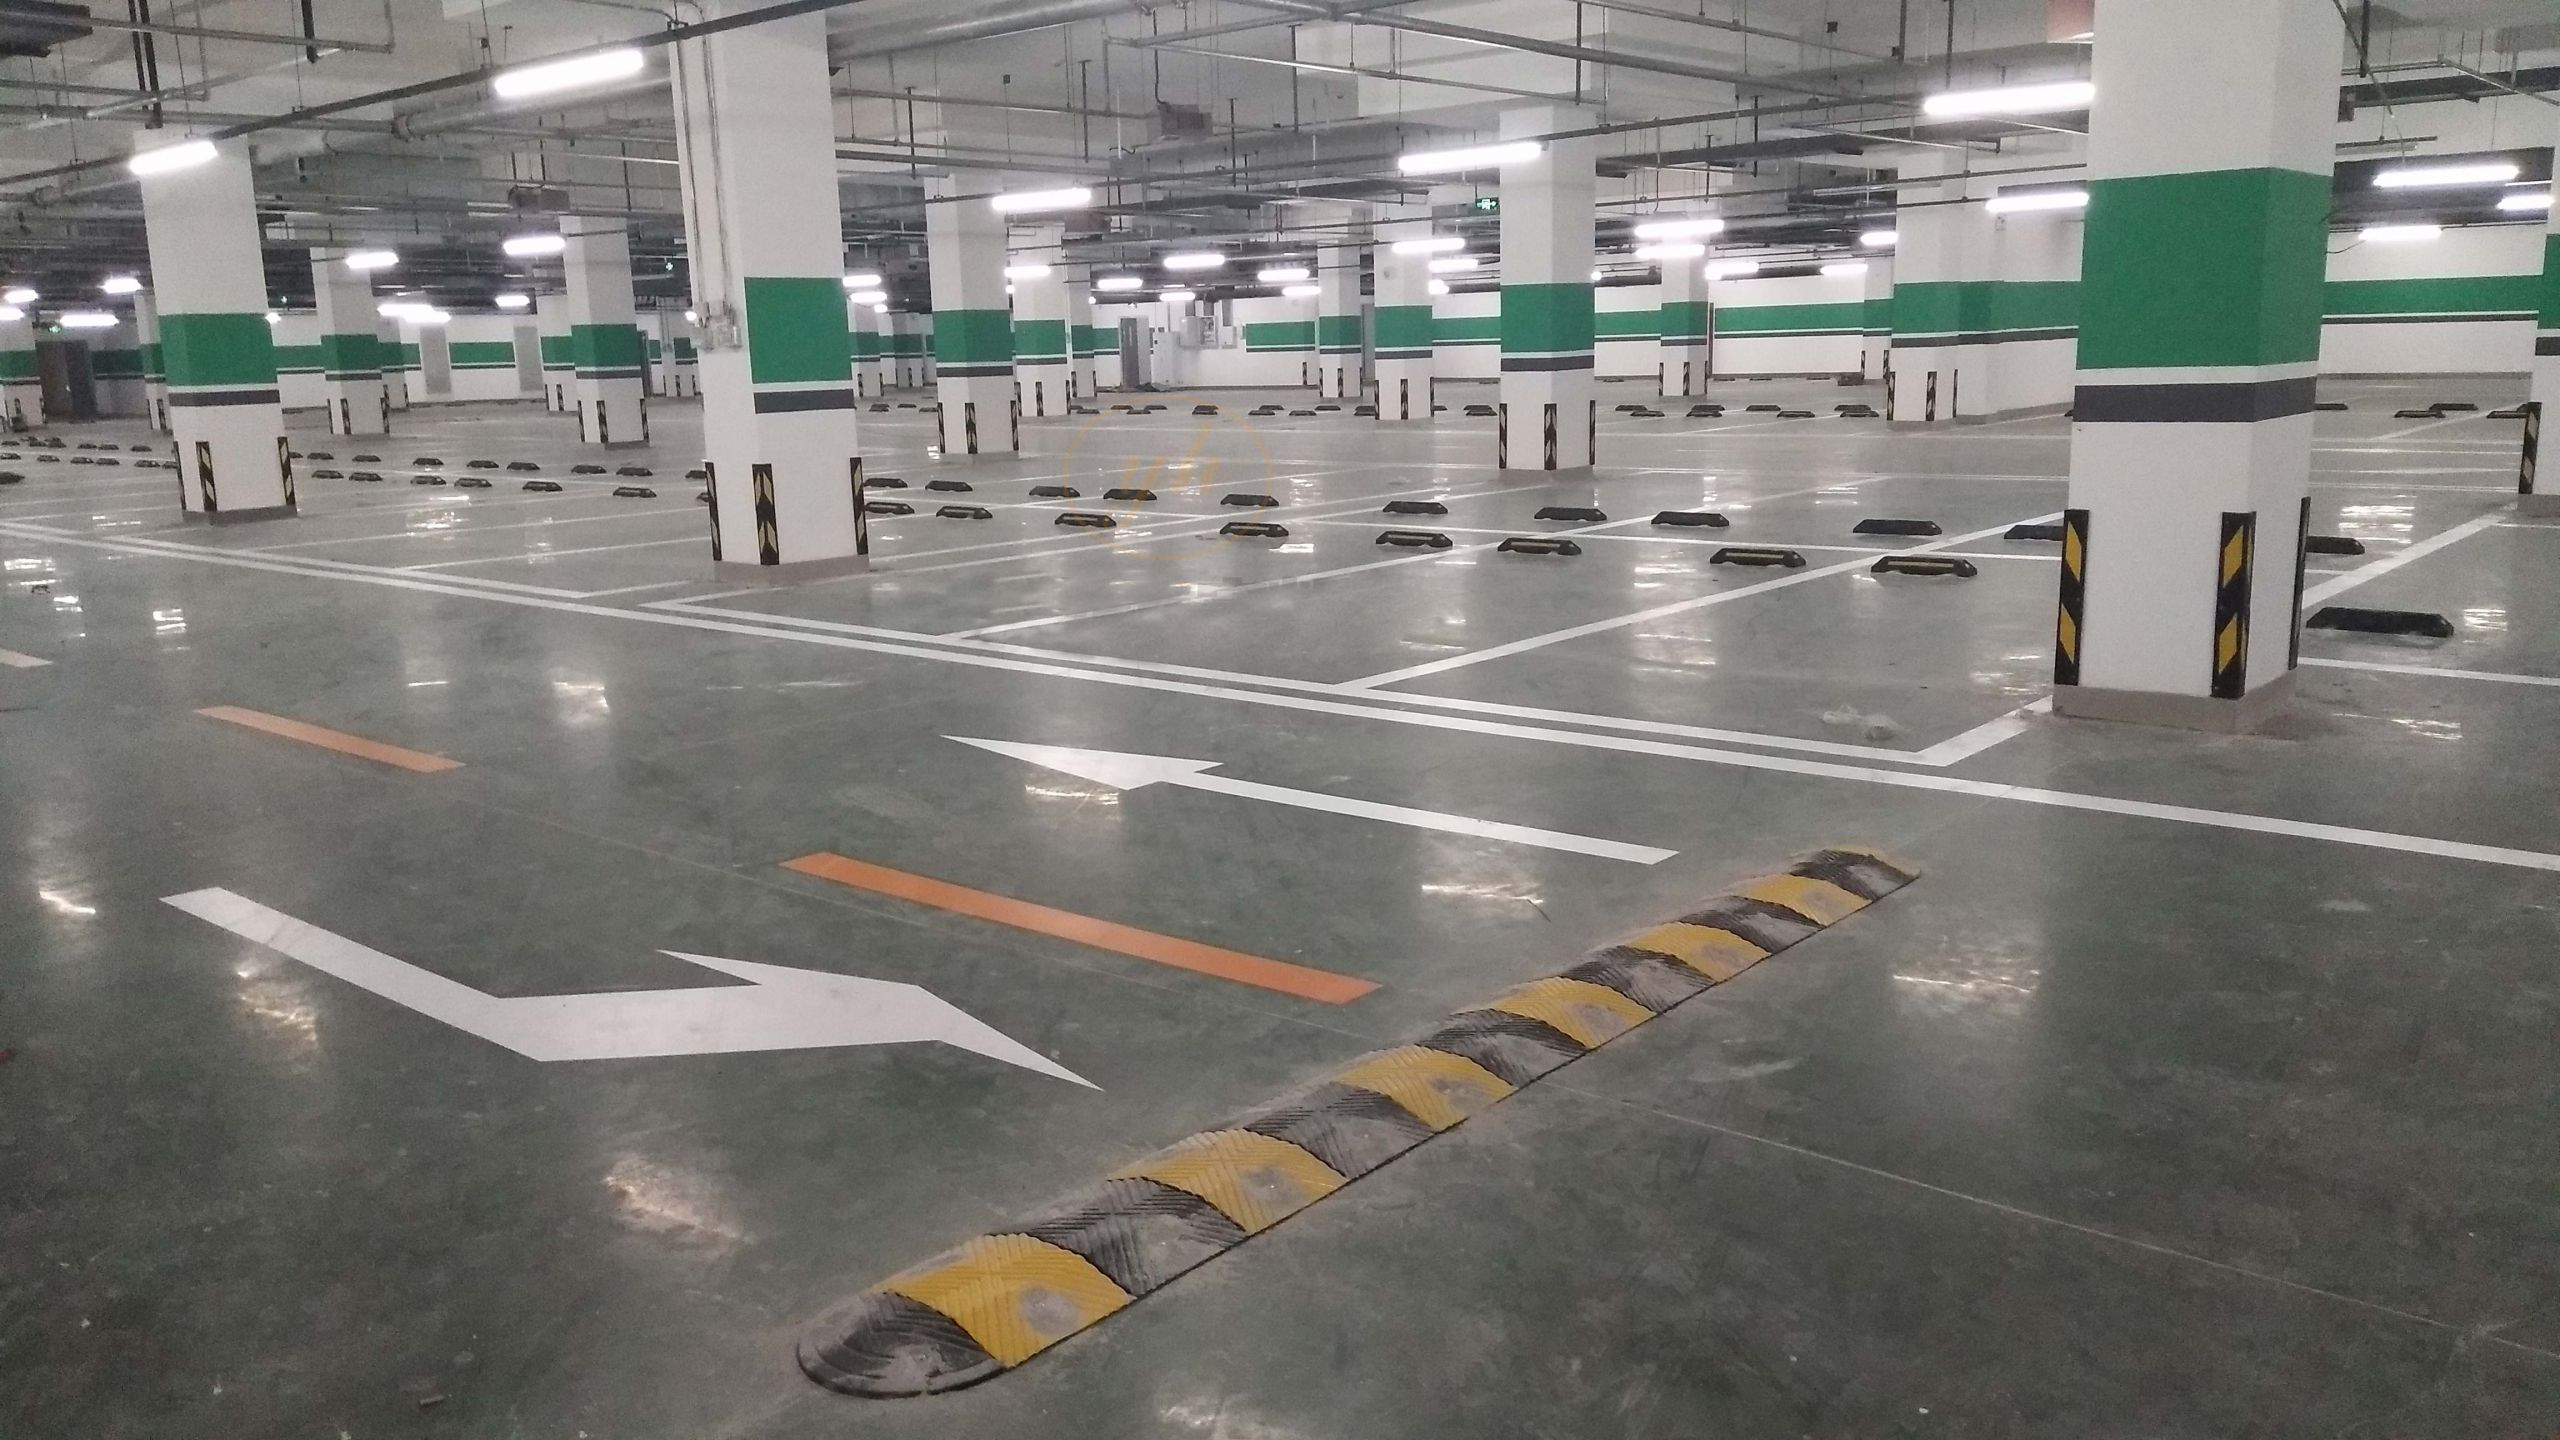 Parking lot devices include speed bump and wheel stops